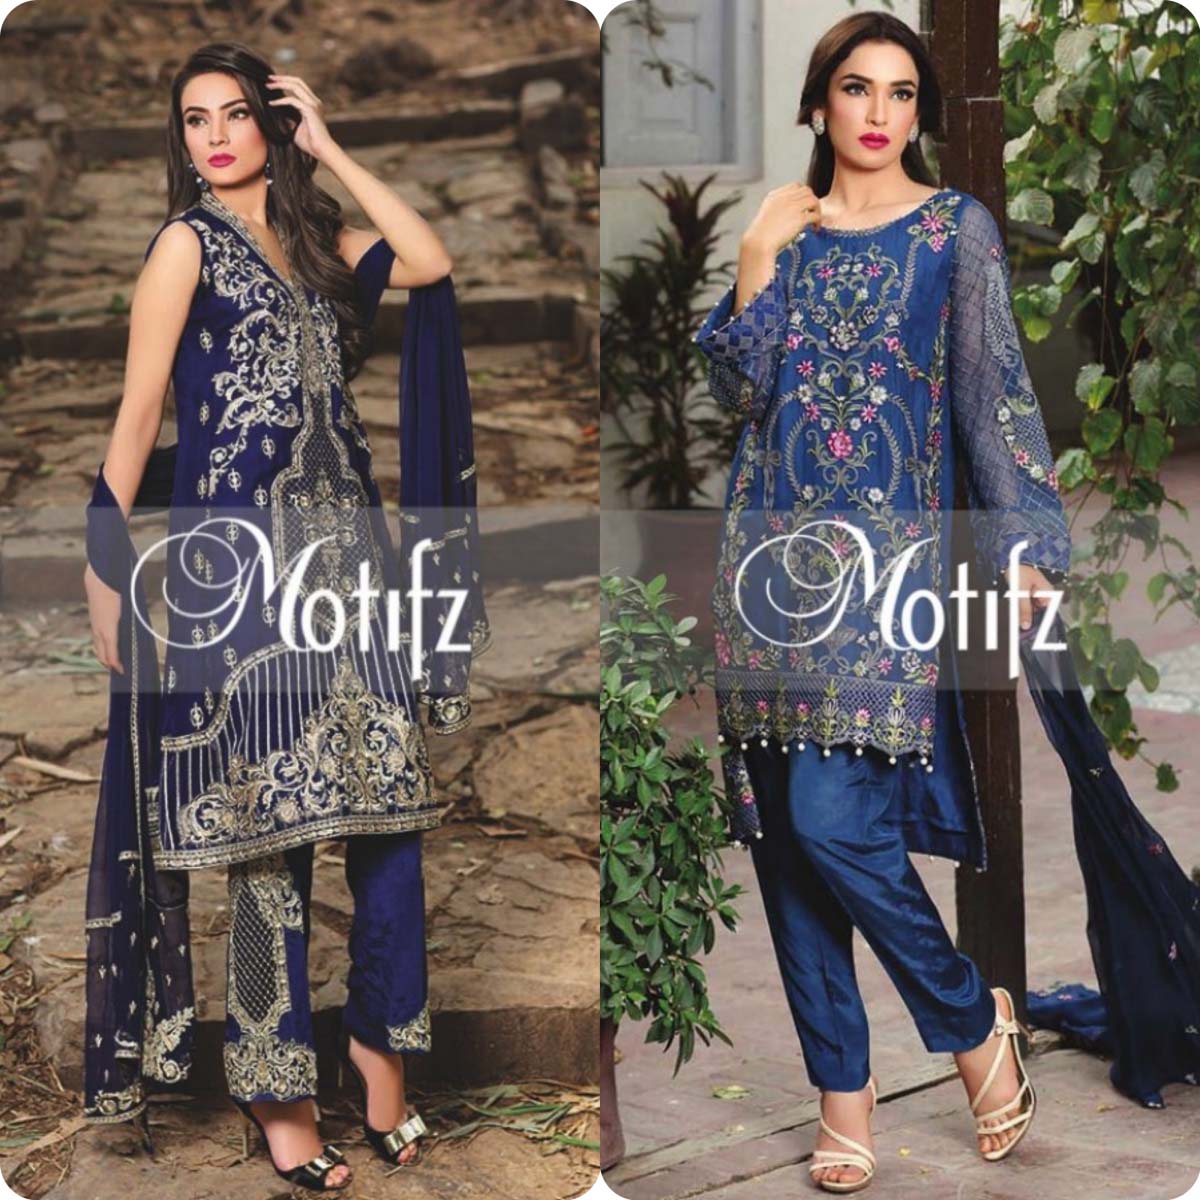 Motifz embroidered dresses